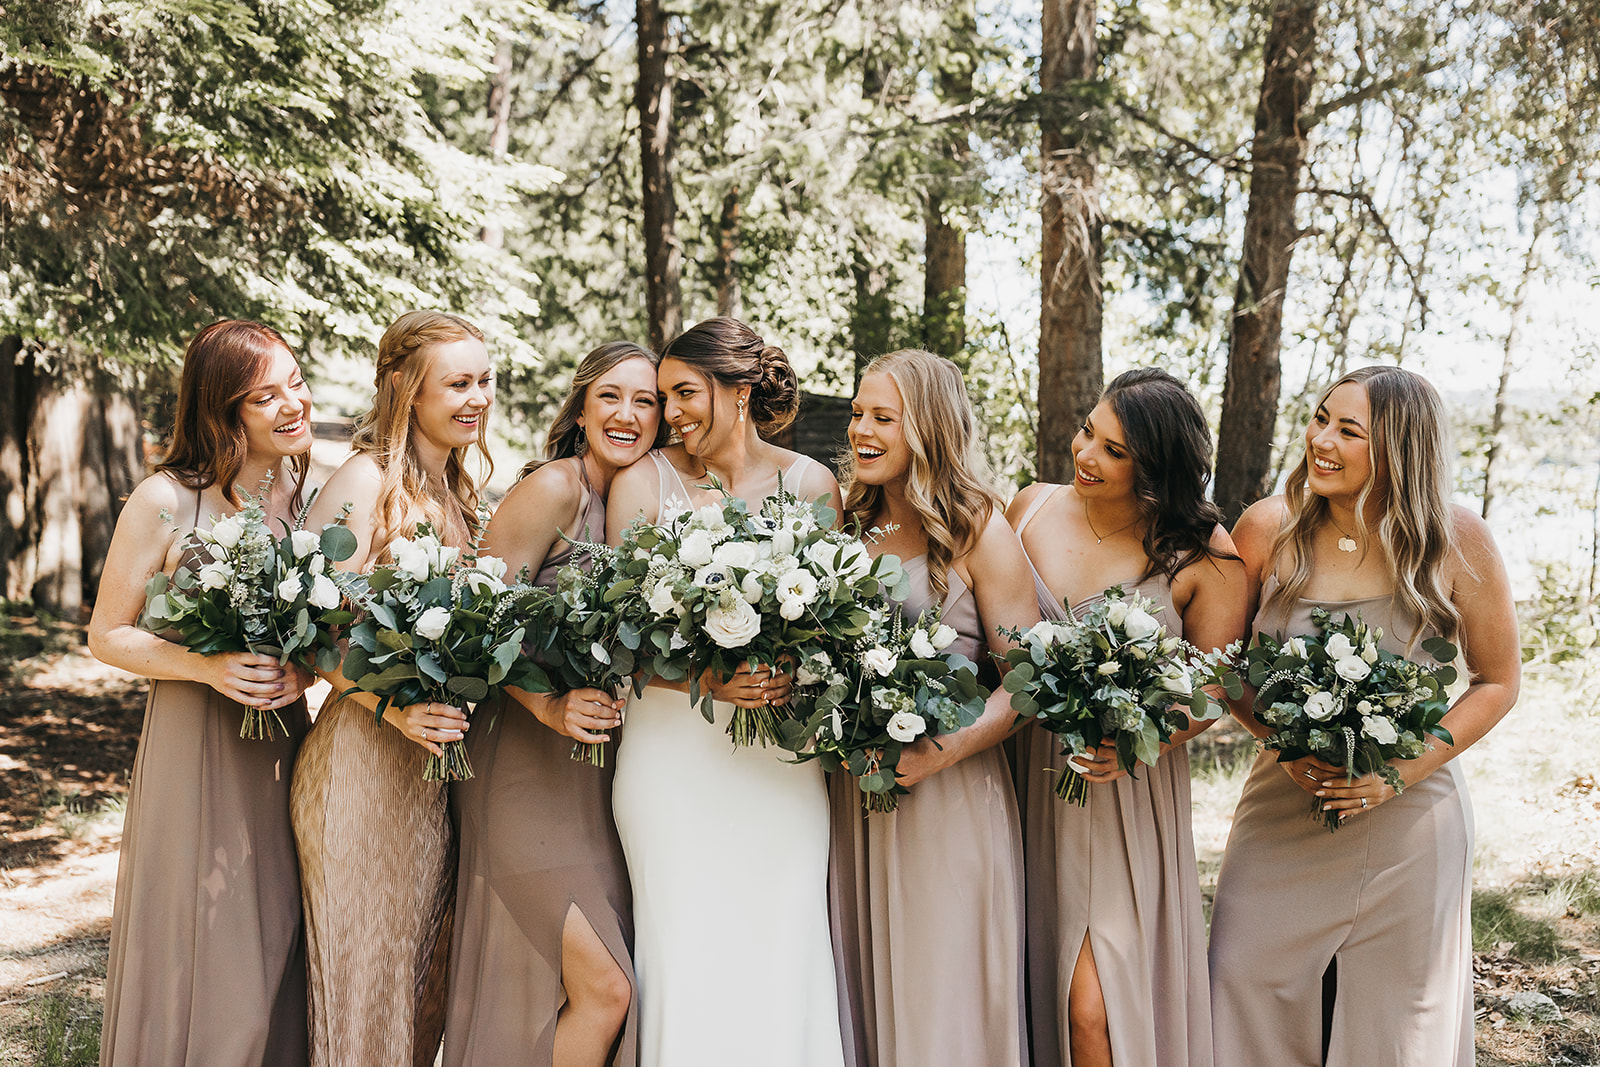 Bride and bridesmaids before the wedding ceremony at private lake house.